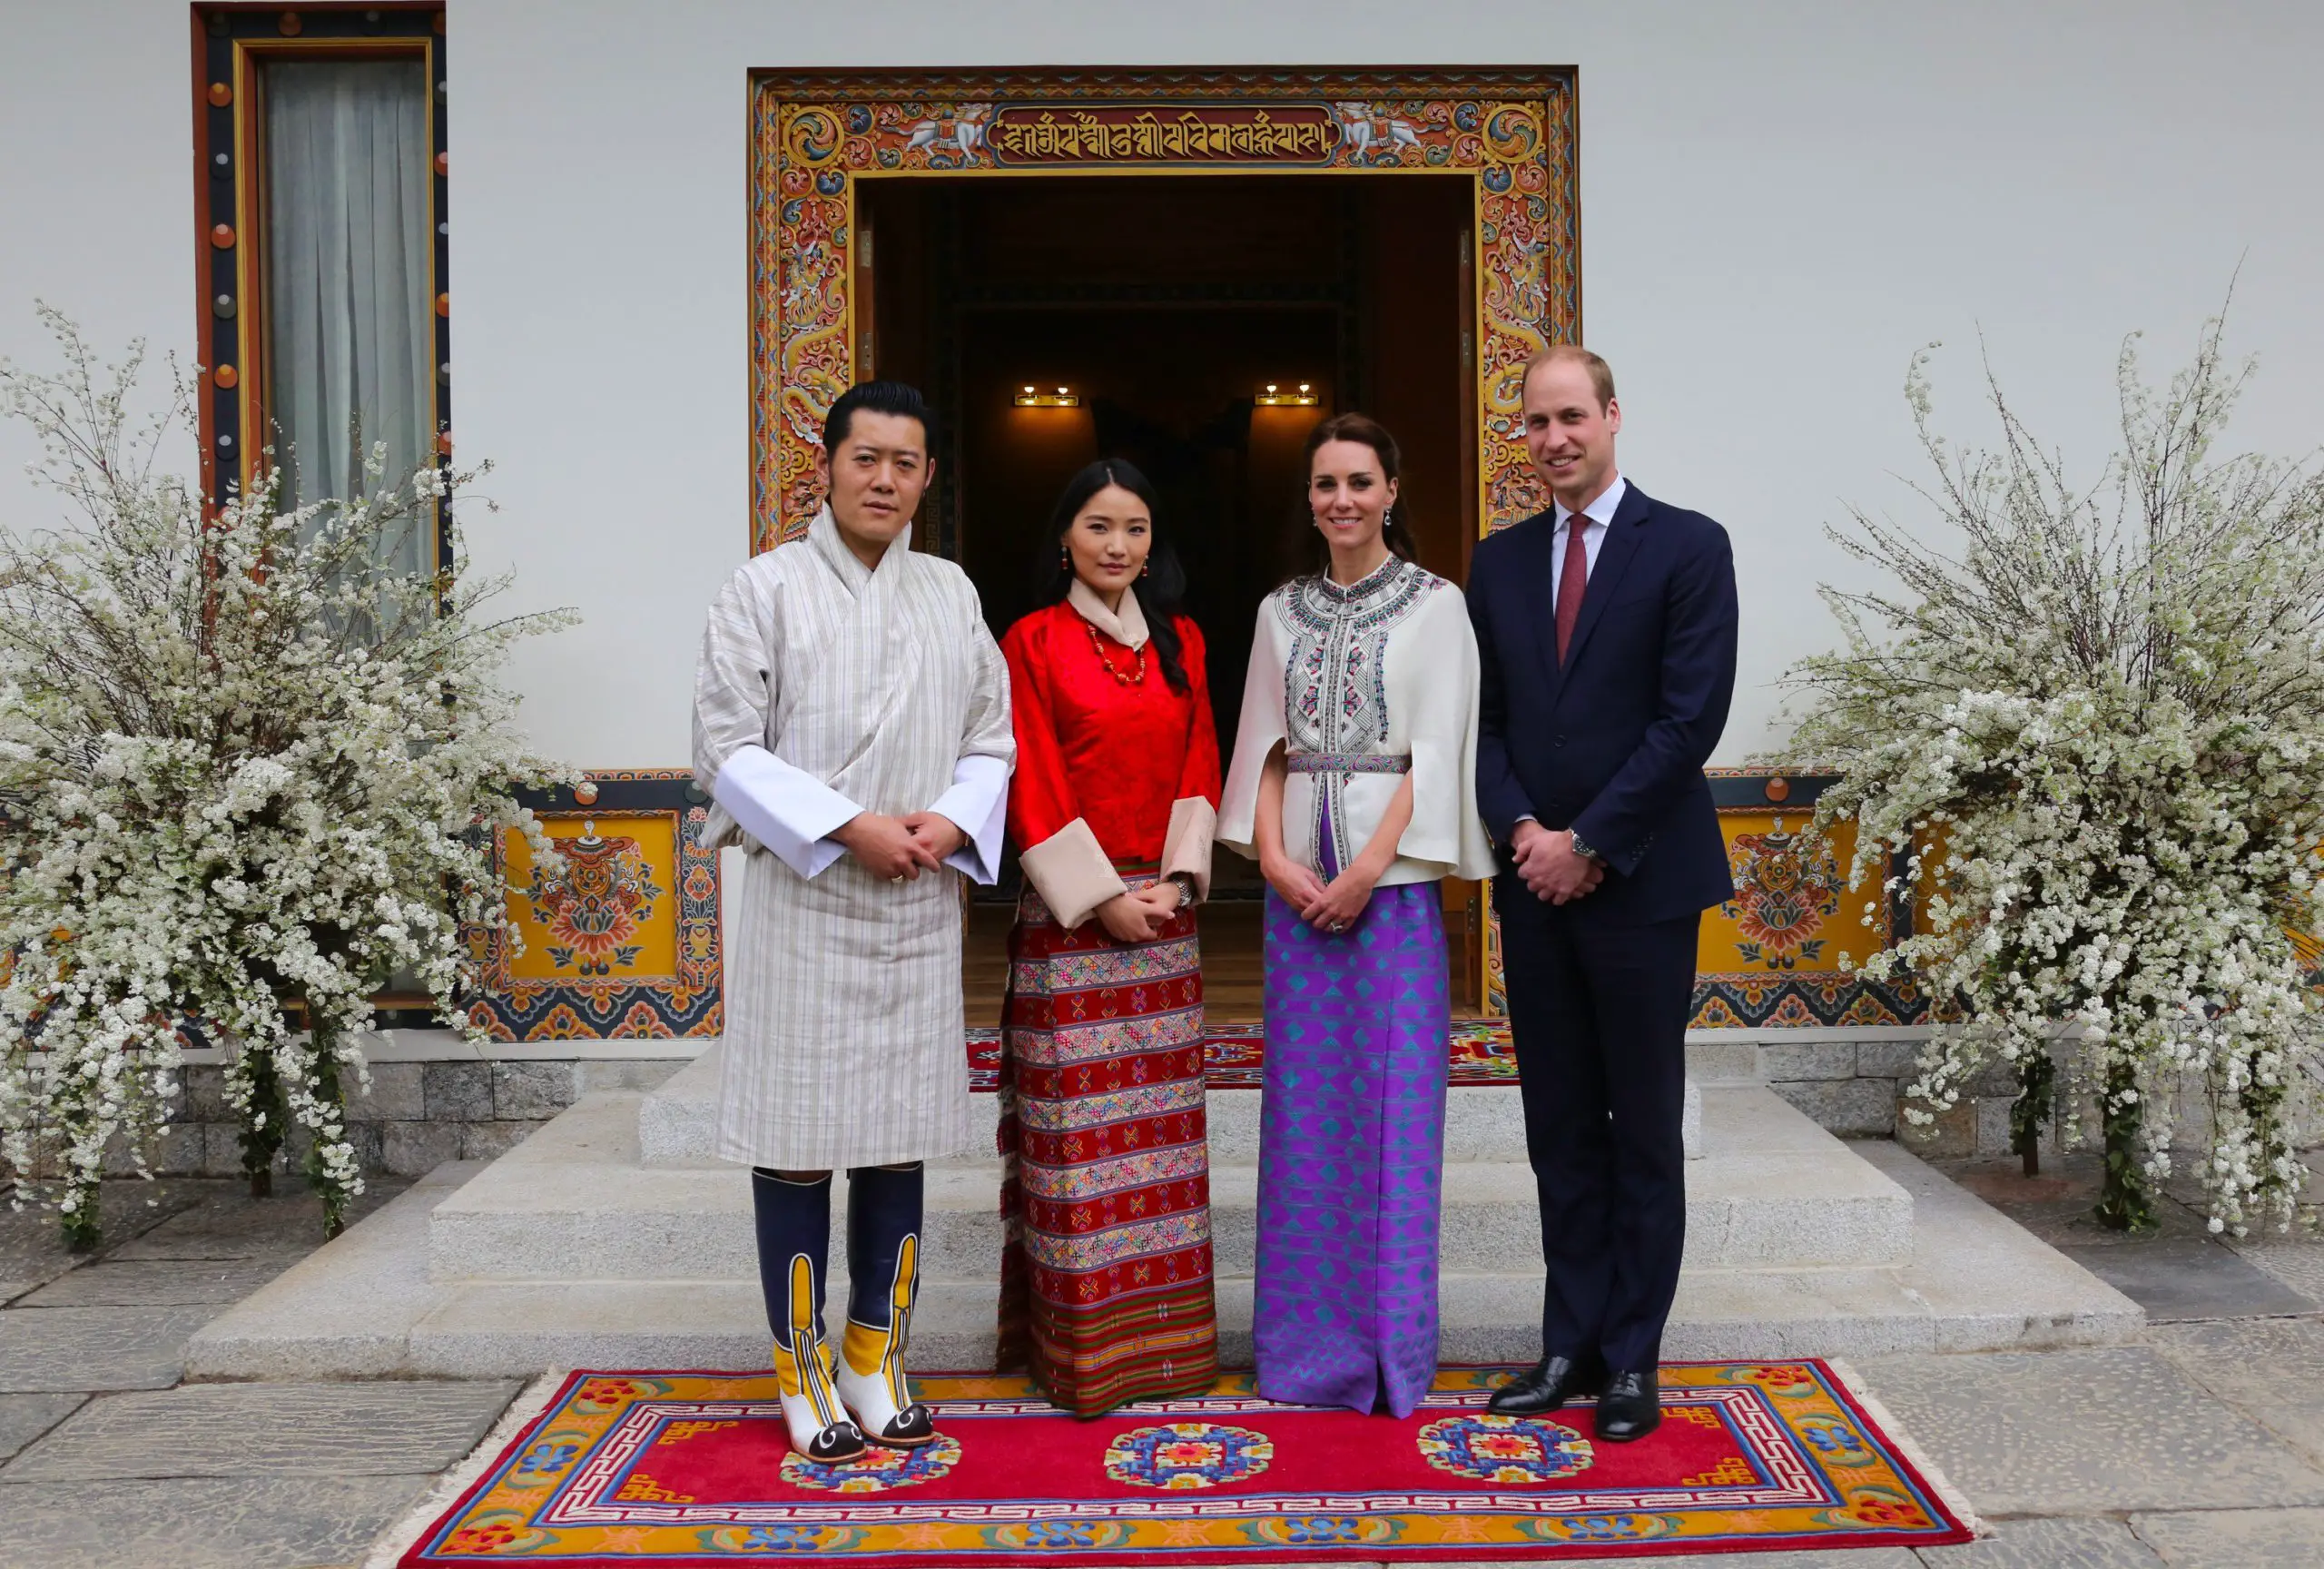 The Duke and Duchess of Cambridge with the King and Queen of Bhutan in April 2016